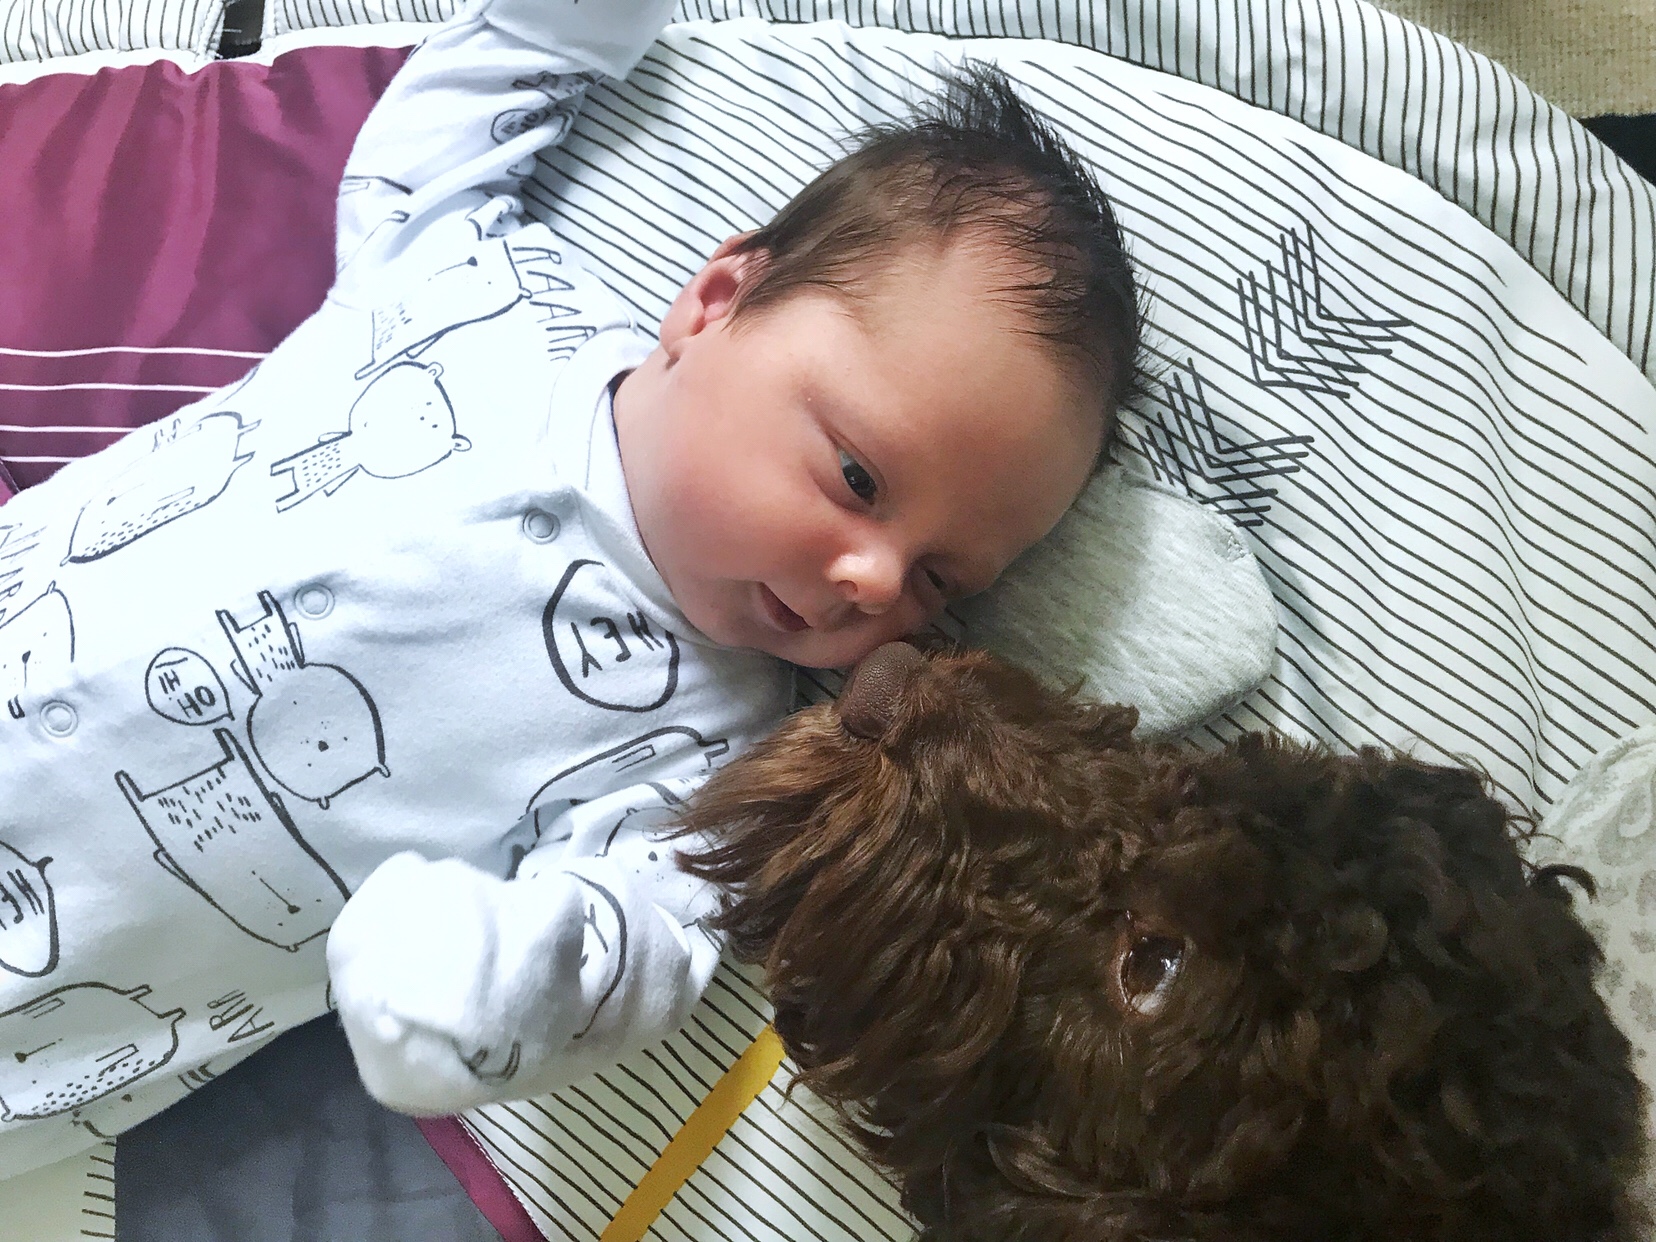 Introducing a baby to a dog